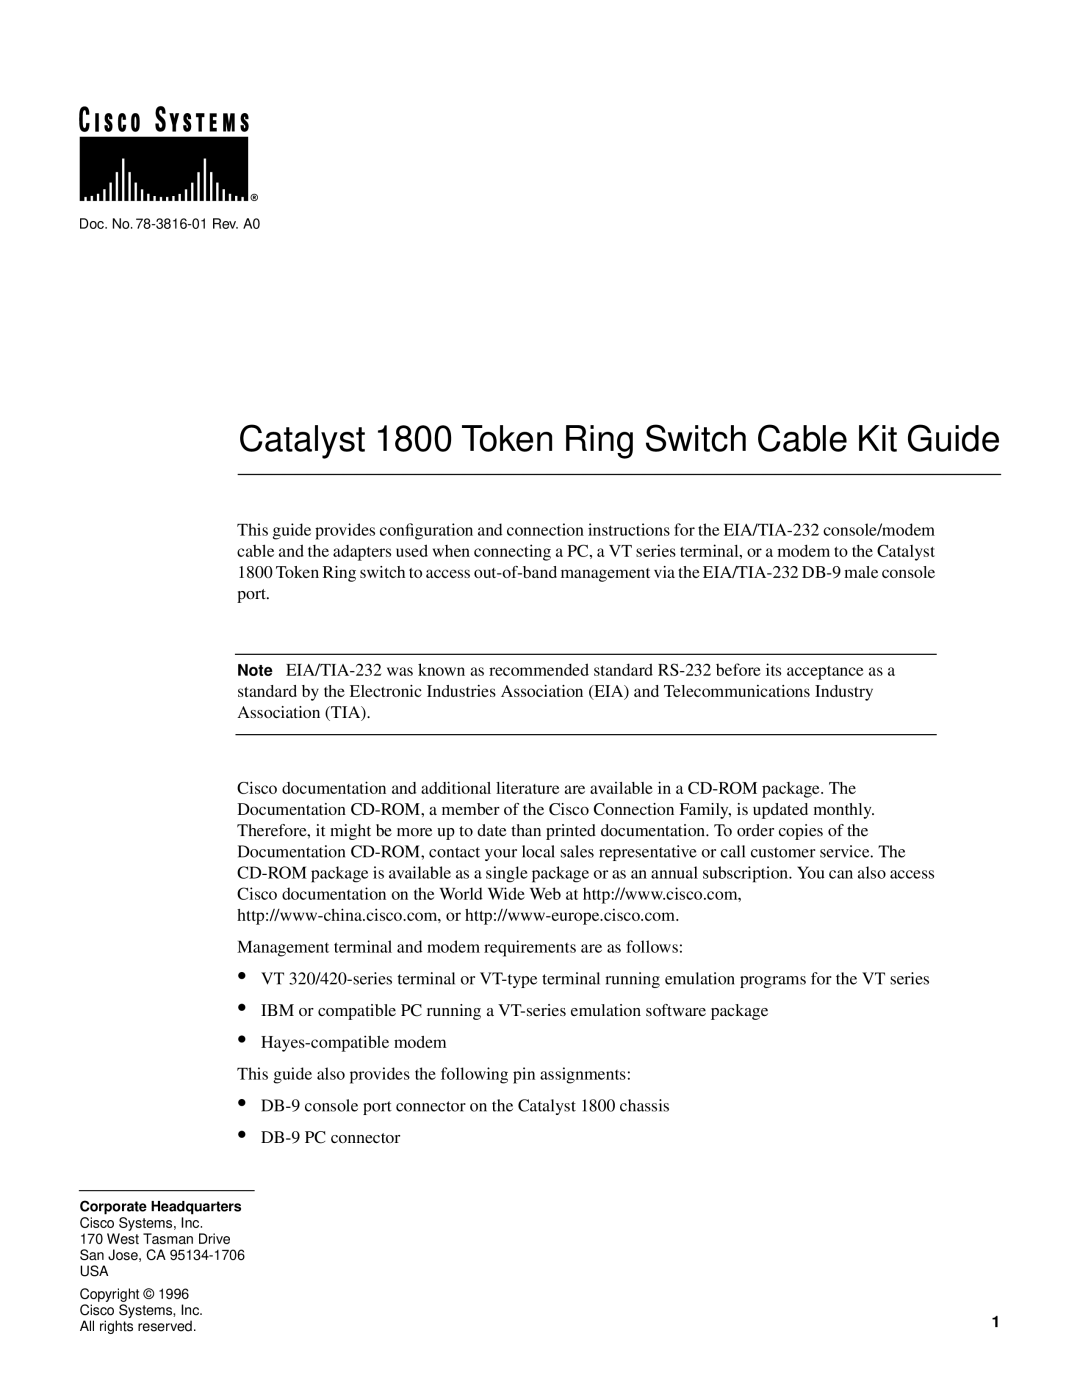 Cisco Systems EIA/TIA-232 manual Catalyst 1800 Token Ring Switch Cable Kit Guide 